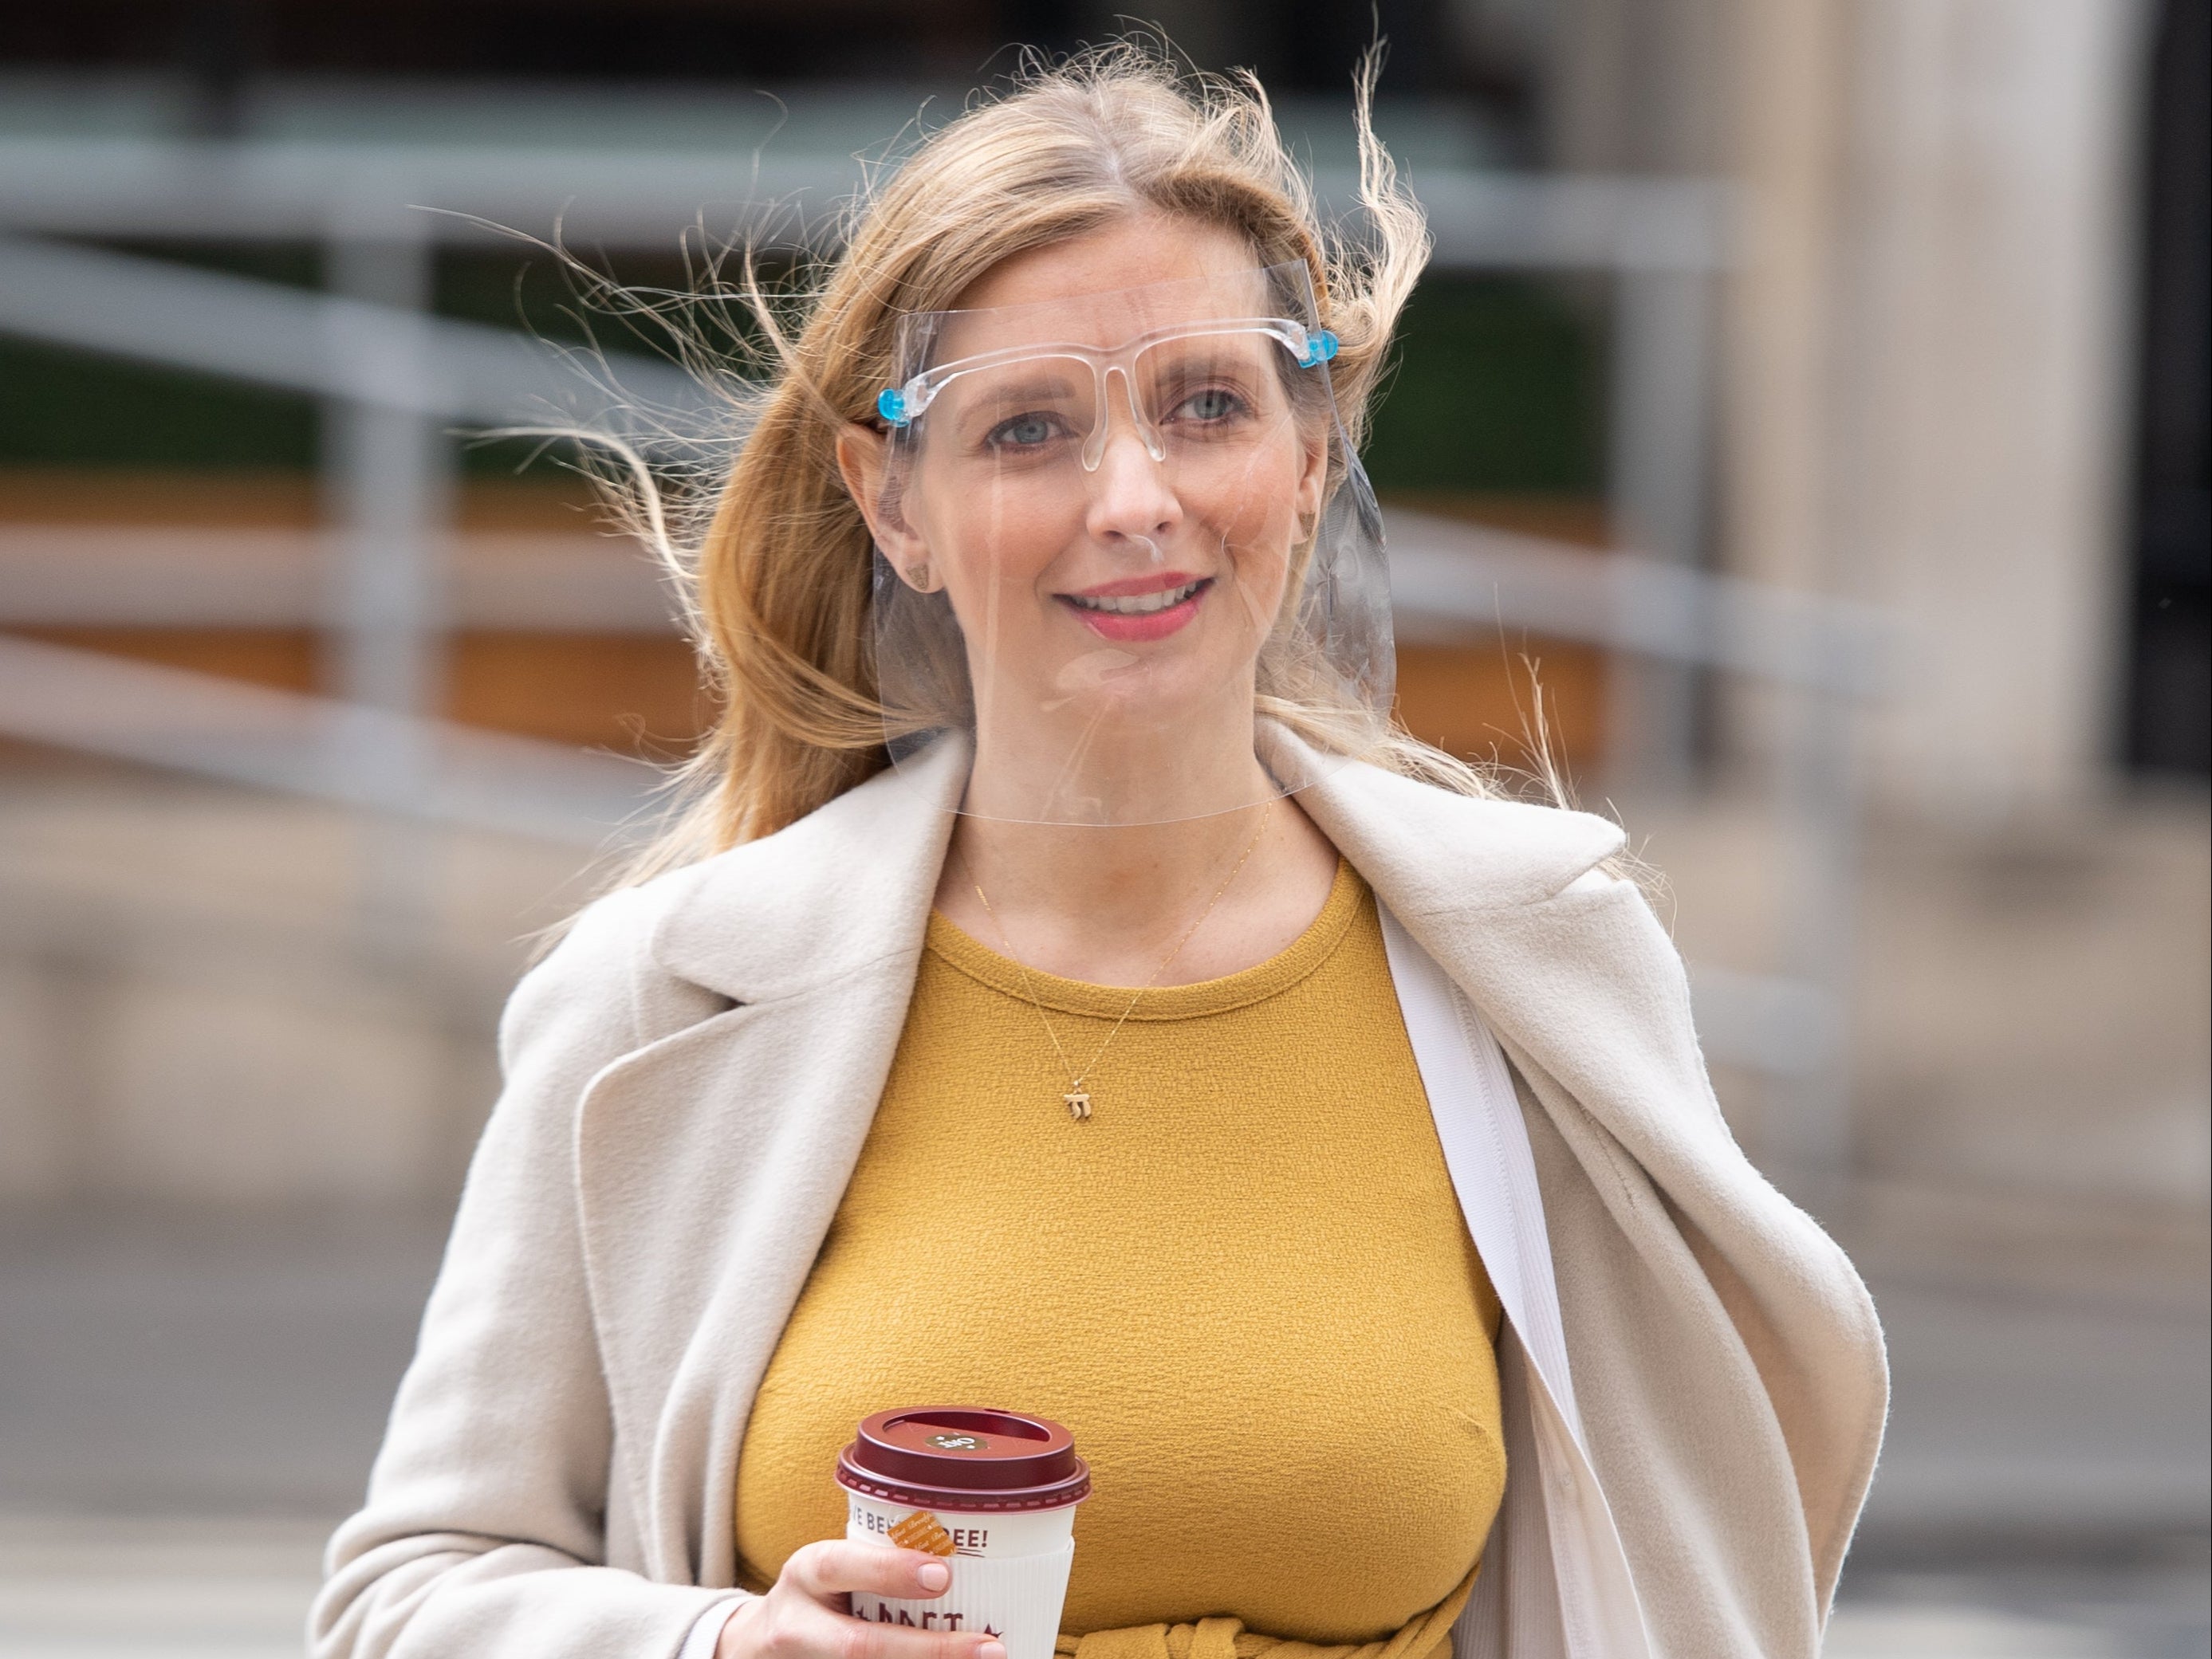 Rachel Riley arrives at the Royal Courts of Justice in London (Dominic Lipinski/PA)